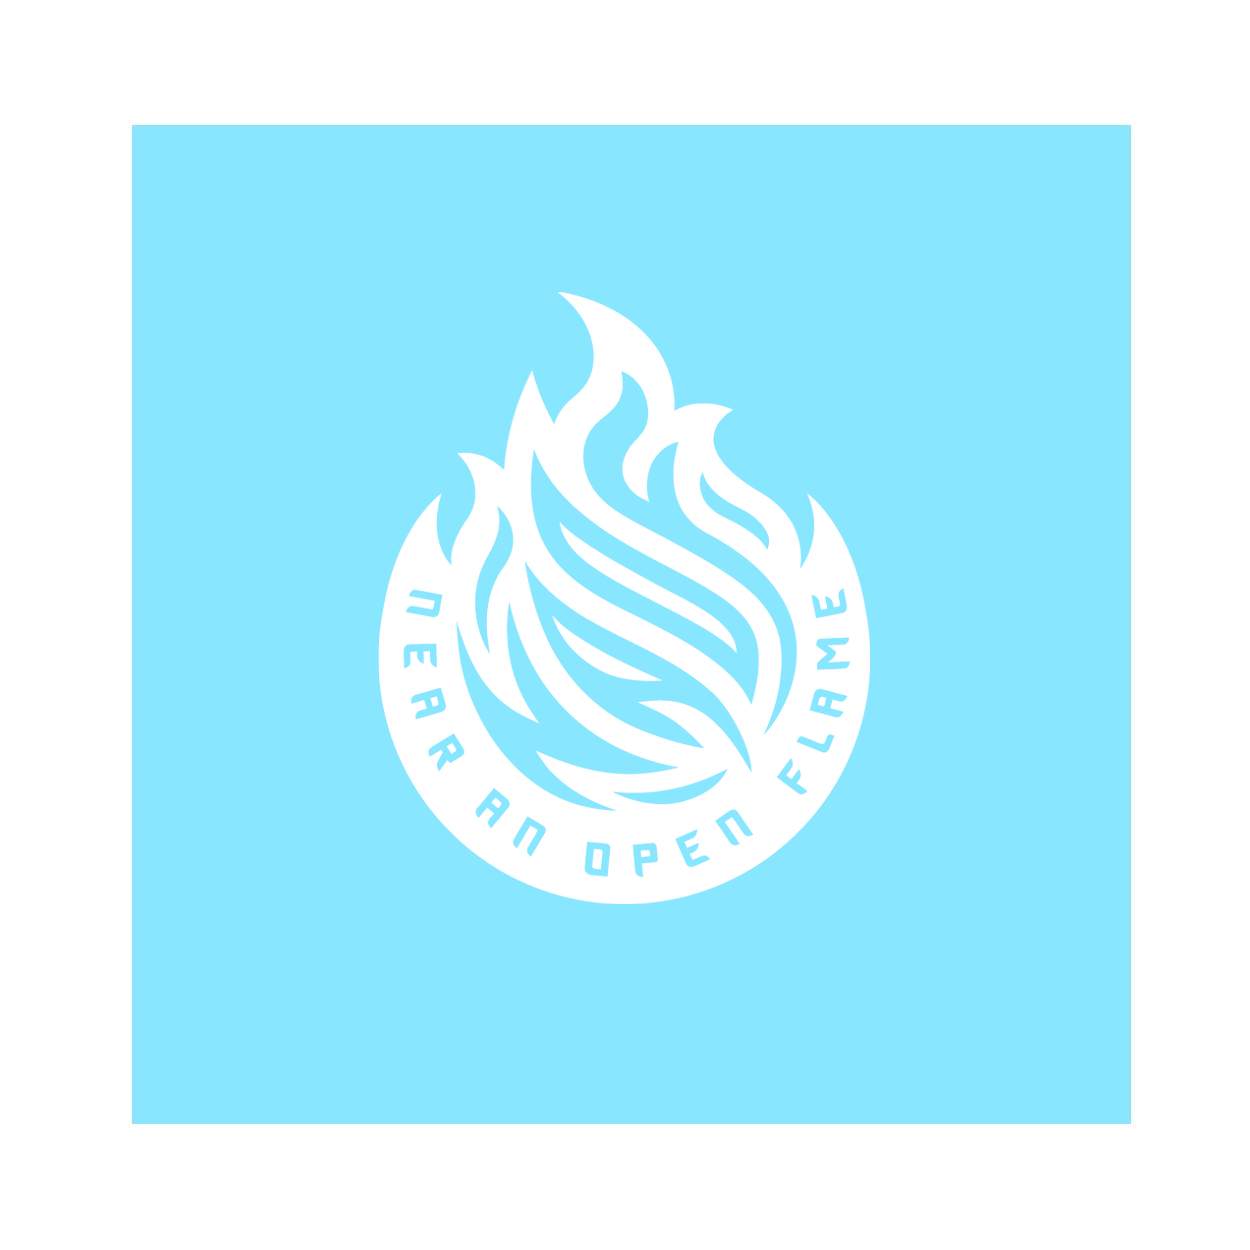 Near An Open Flame Classic Square Decal